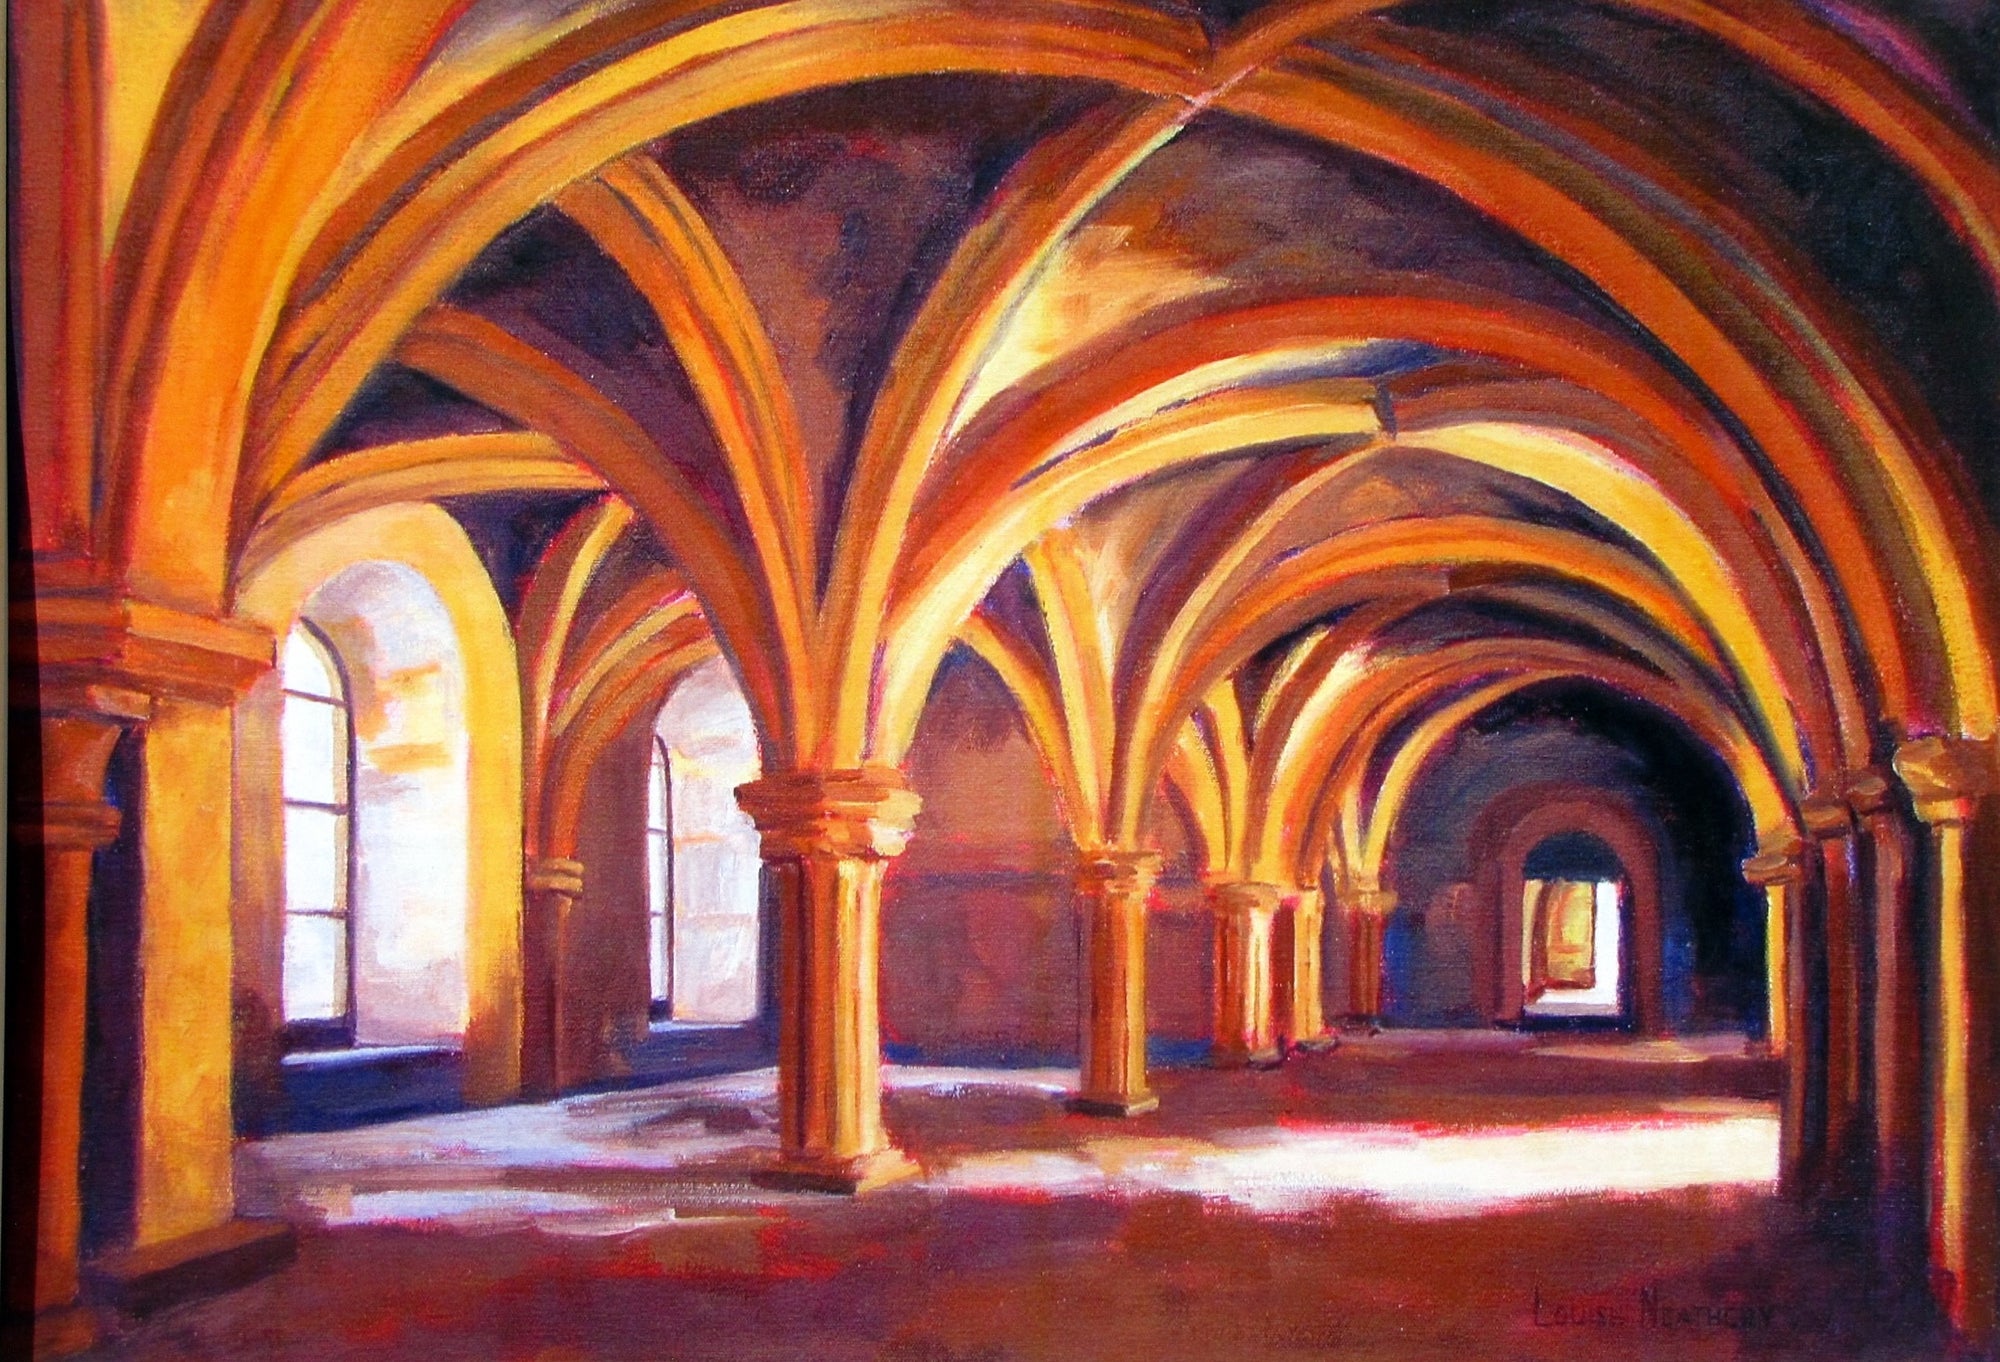 The Cloister </br> (located in the Abbey of Fontenay, France)